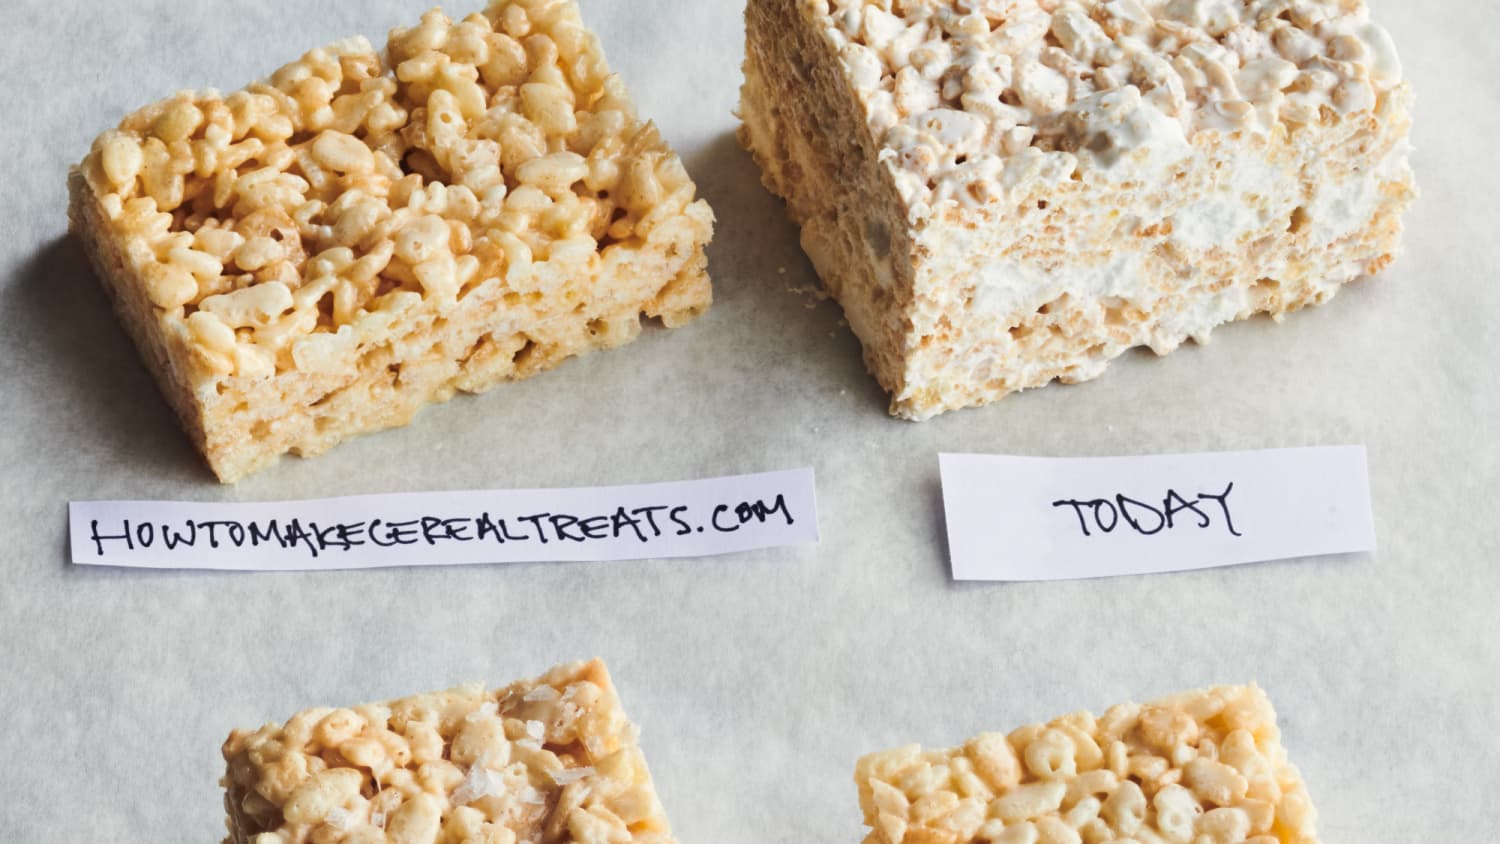 We Tried 4 Popular Rice Krispies Treats - Here's The Best | Kitchn